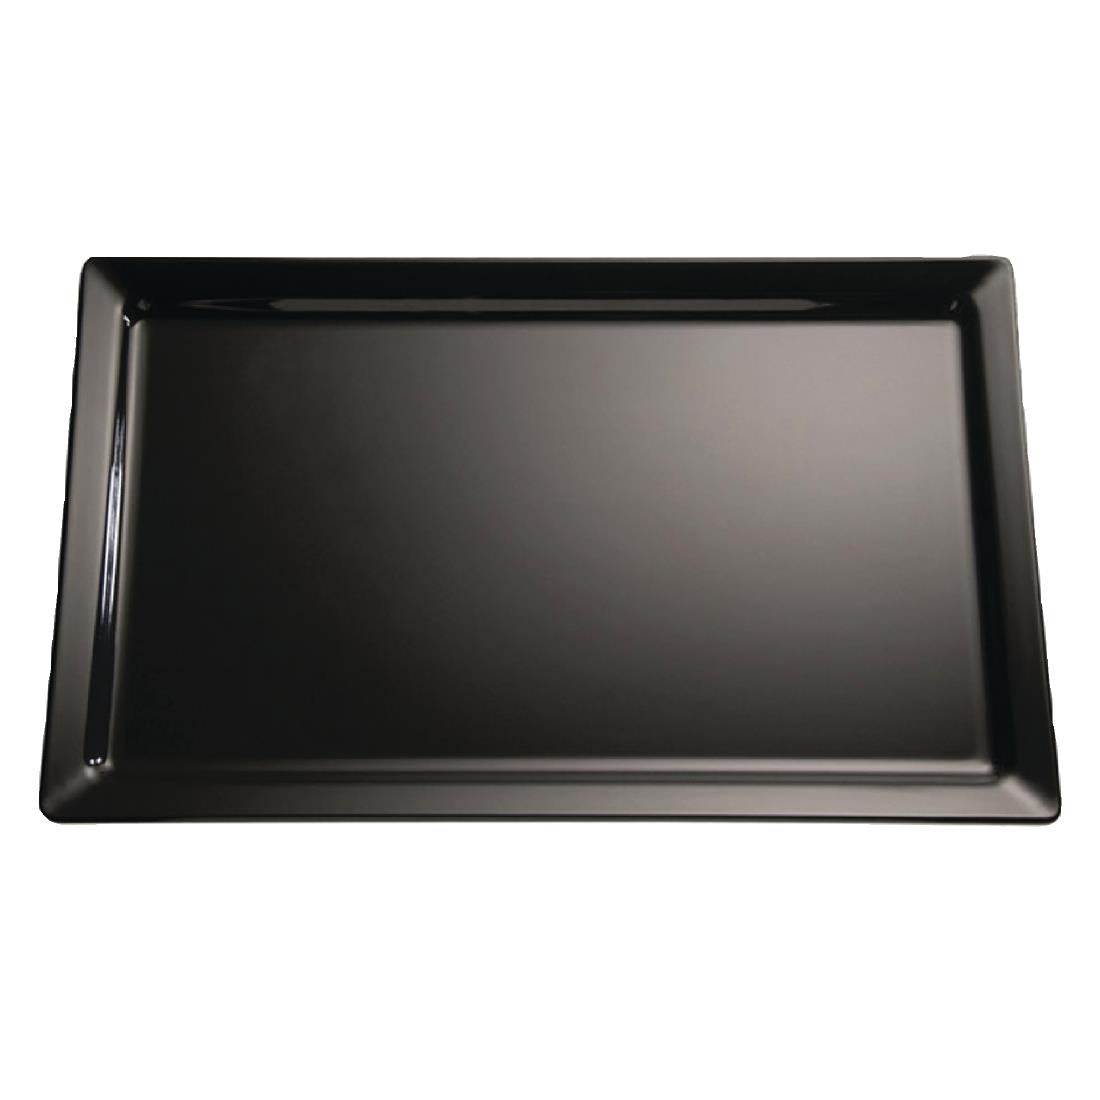 GF123 APS Pure Melamine Tray Black GN 1/2 JD Catering Equipment Solutions Ltd